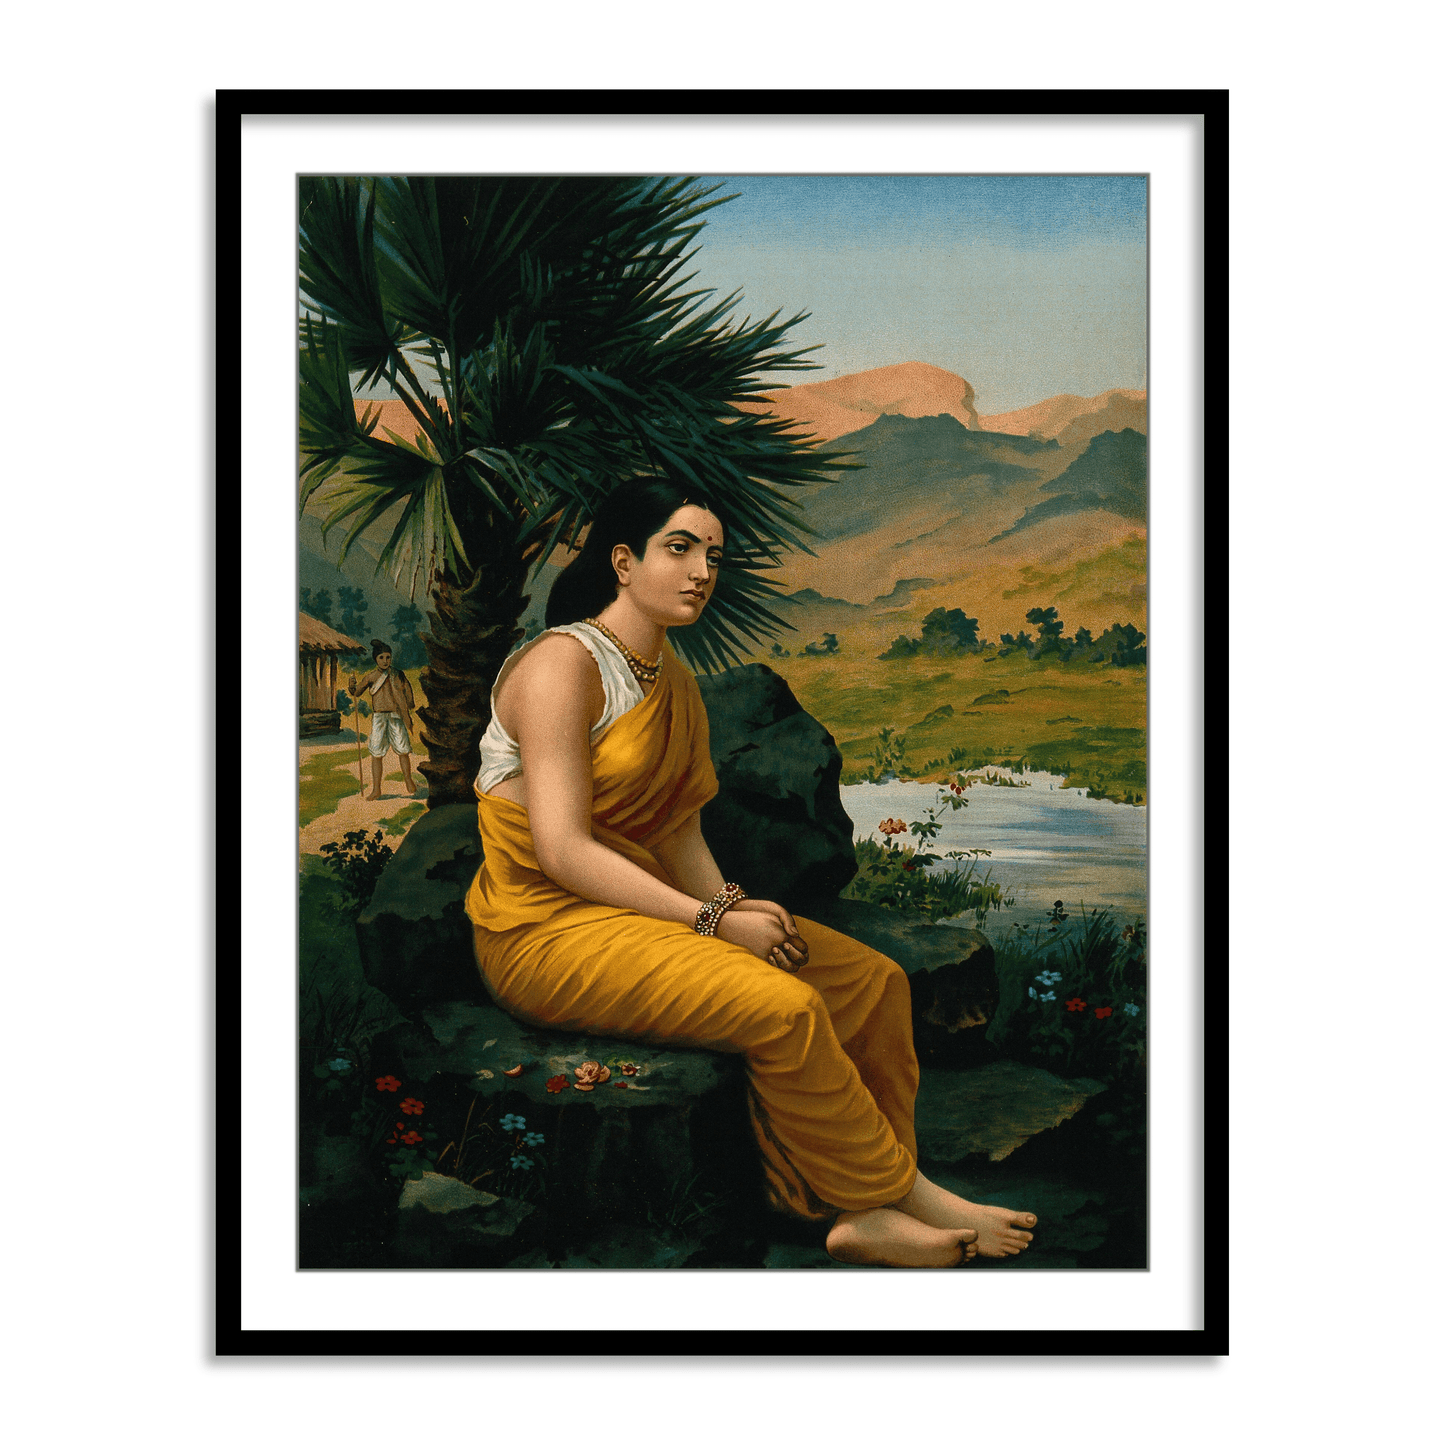 Sita in exile by Raja Ravi Varma Wall Art Painting for Home Decor